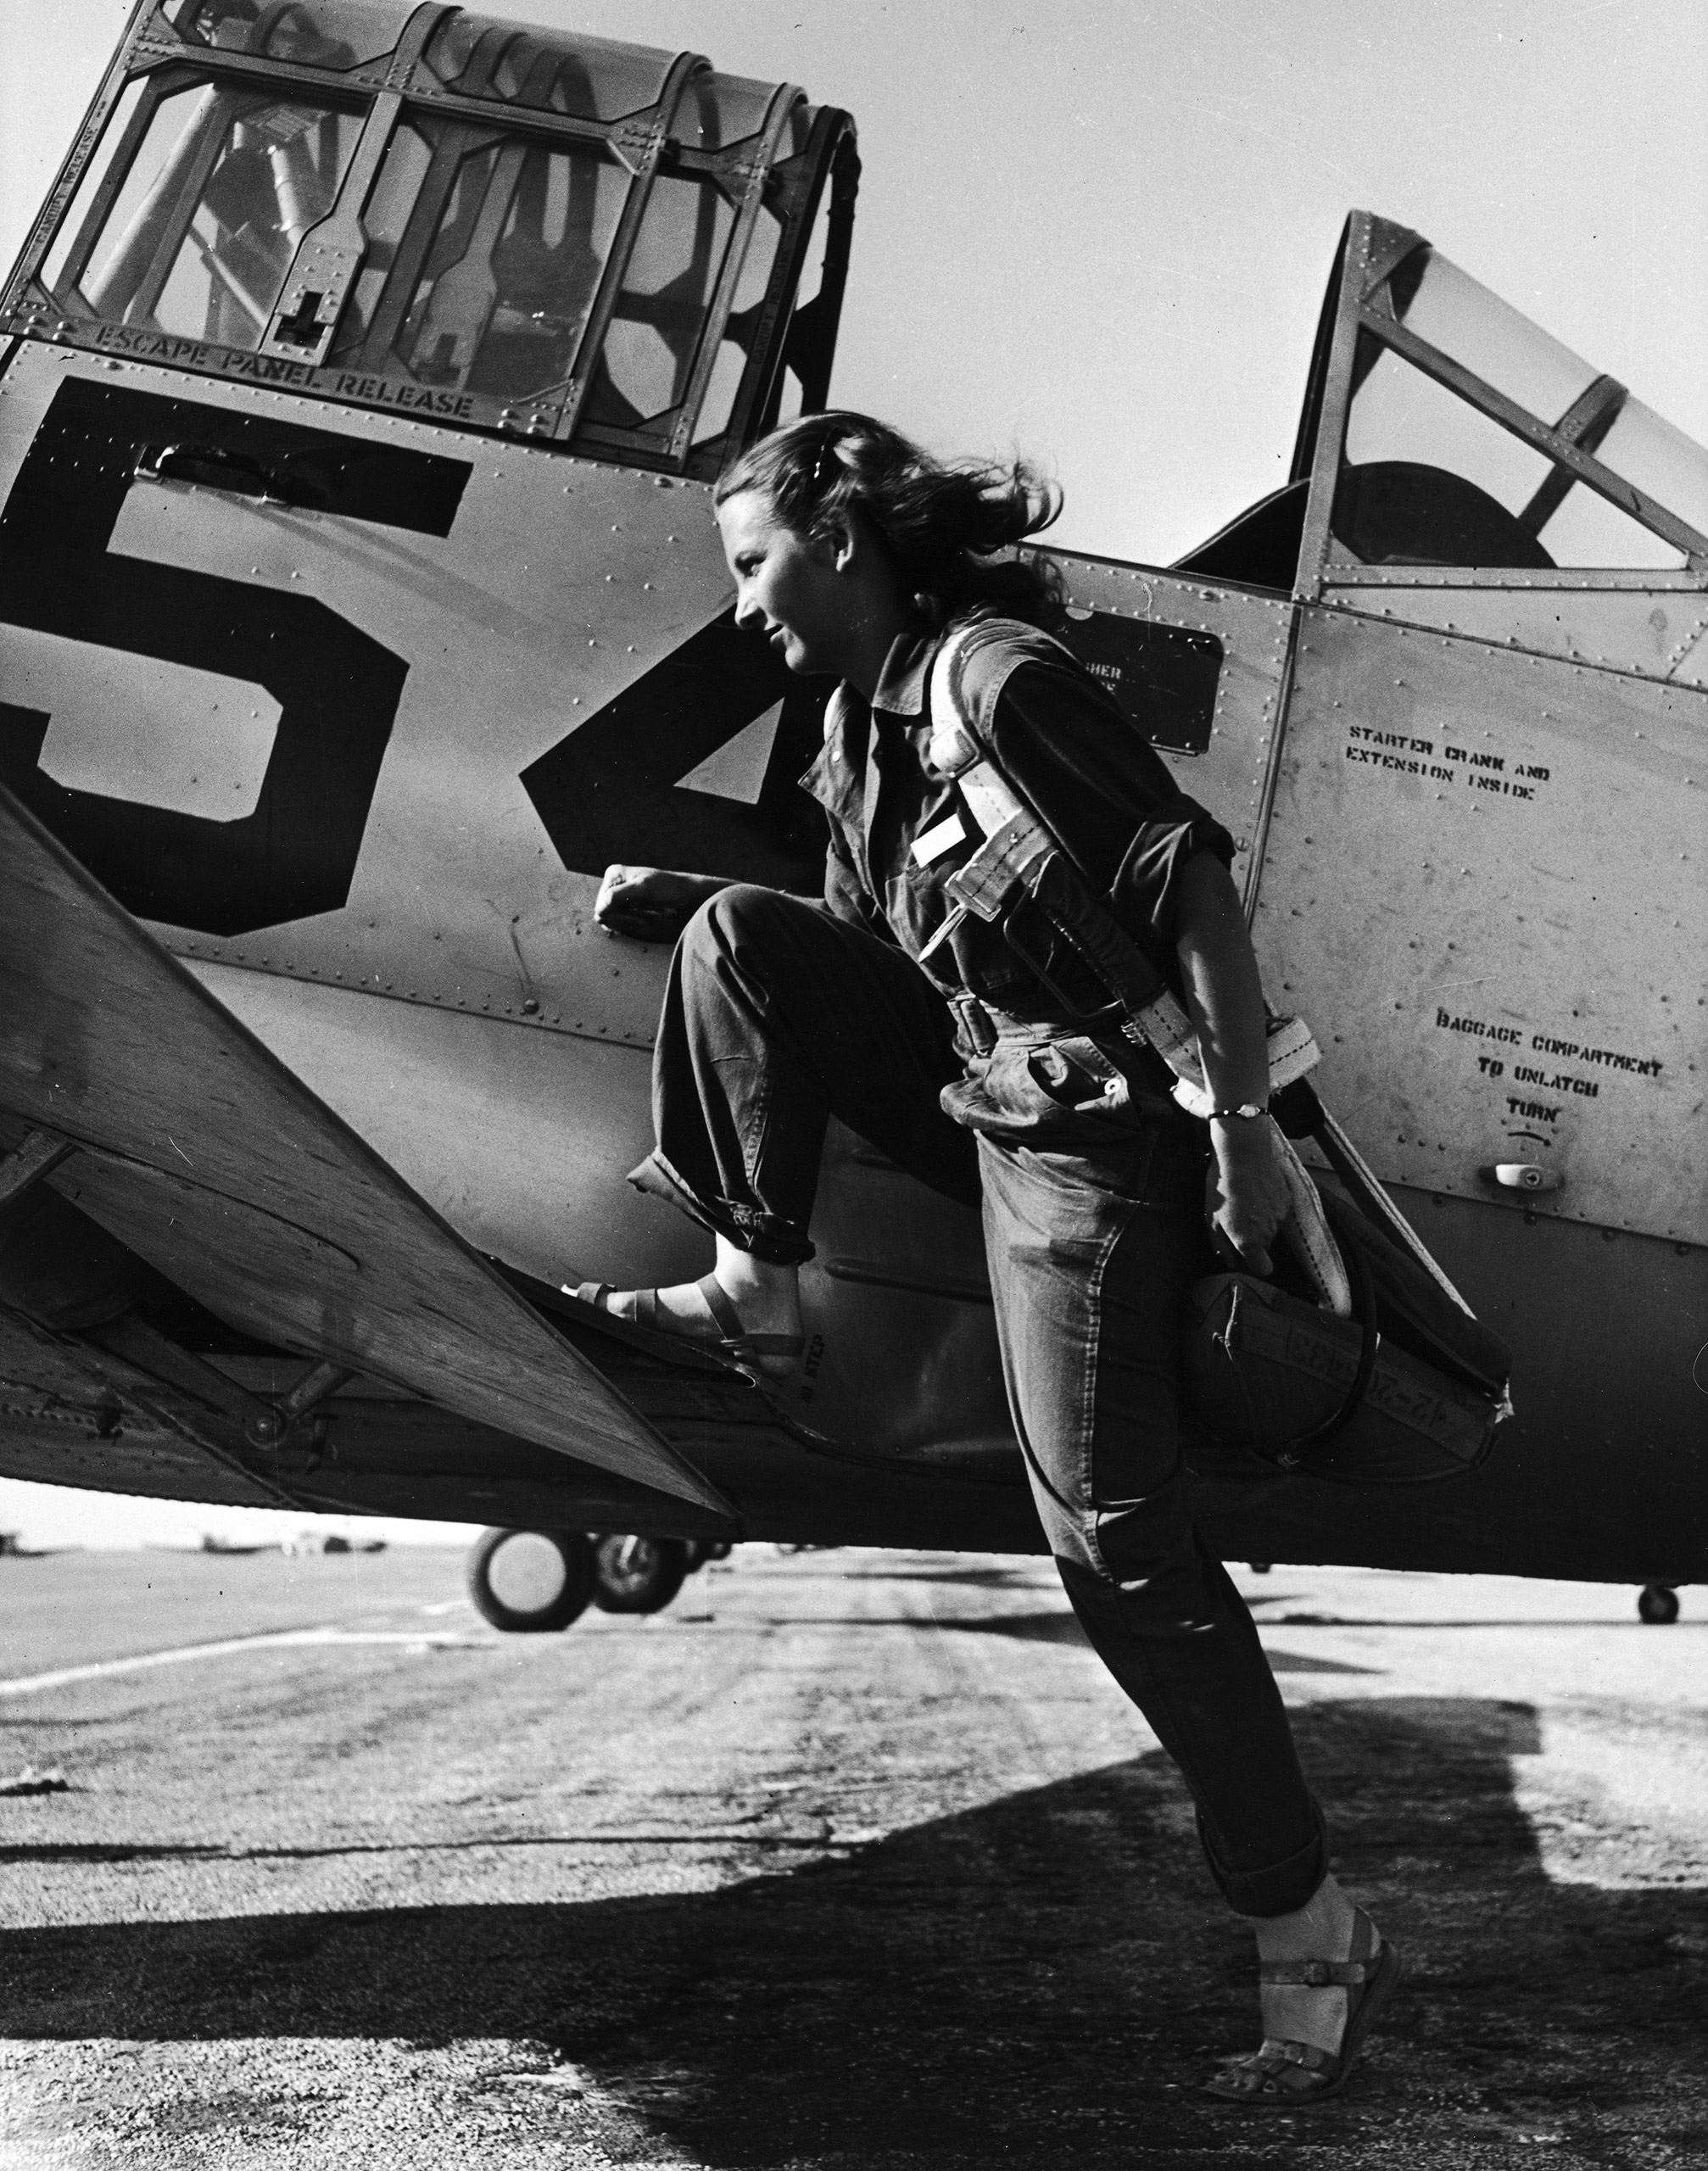 Female pilot of the US Women's Air Force Service posed with her leg up on the wing of an airplane, 1943.